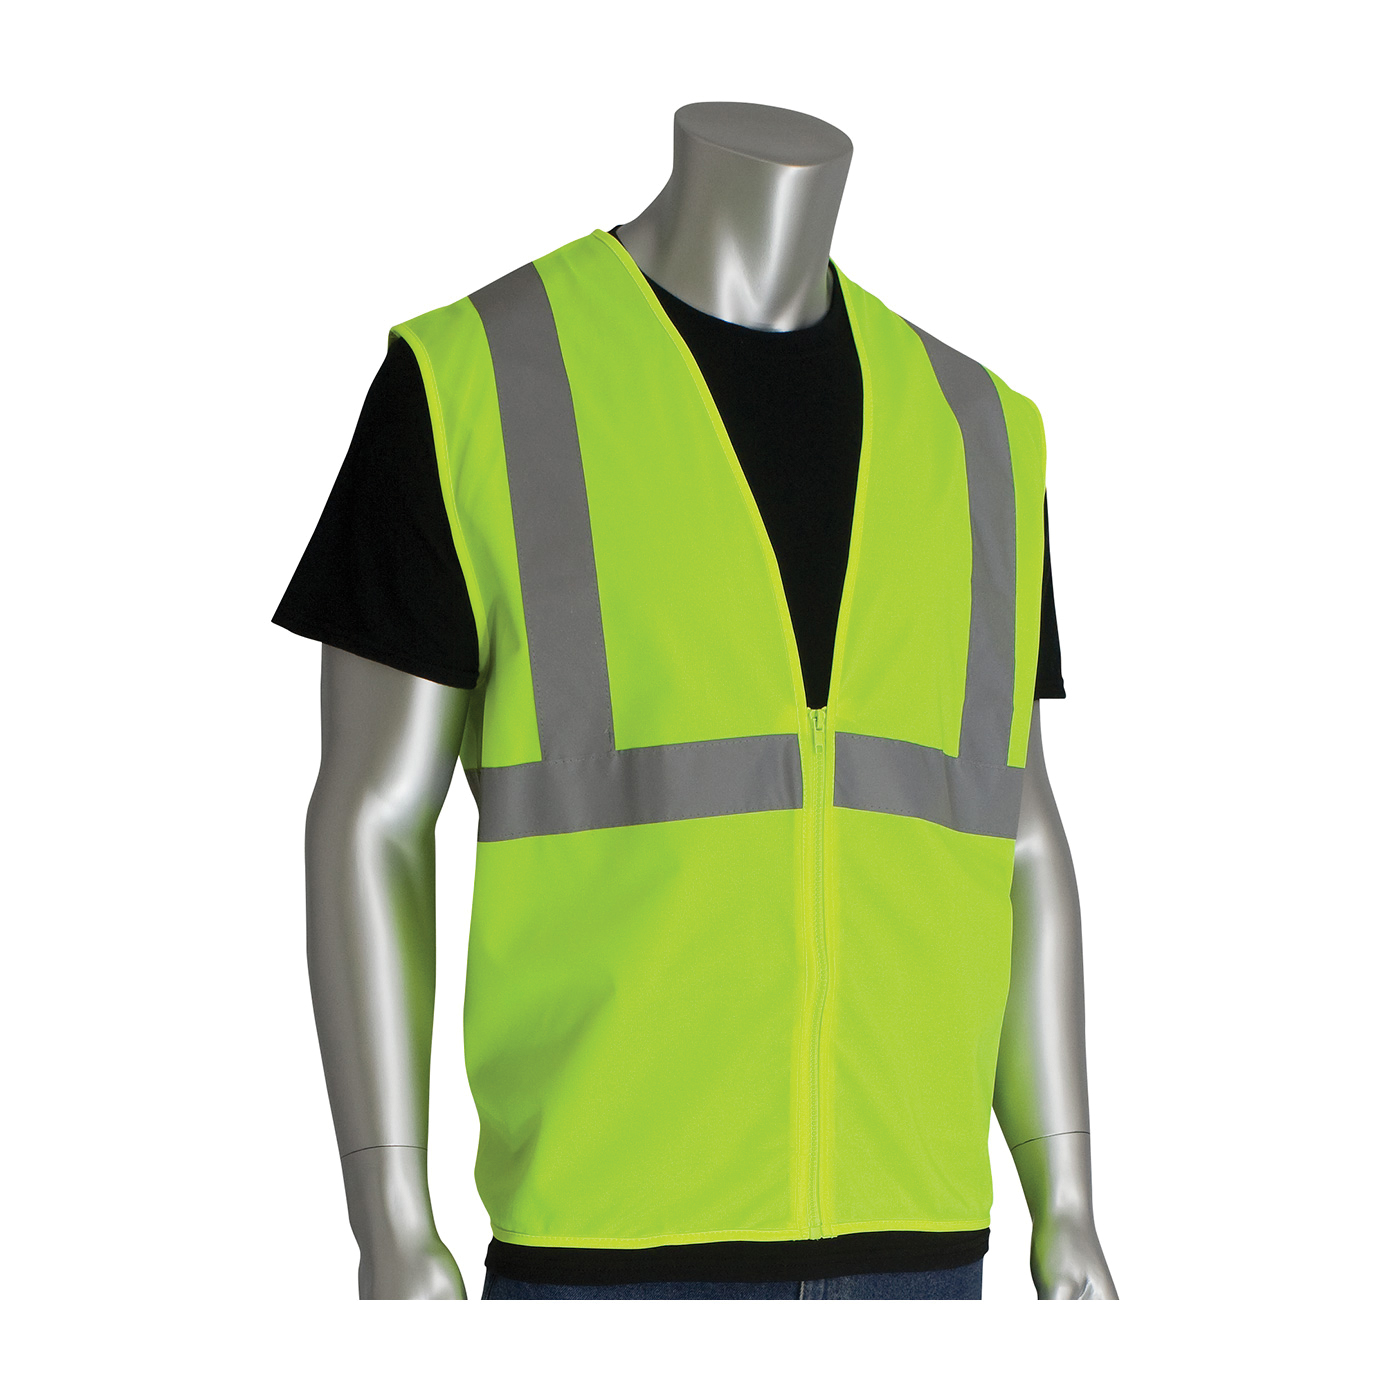 PIP® 302-WCENGZLY-3X Standard Solid Vest, 3XL, Hi-Viz Lime Yellow, Polyester Mesh, Zipper Closure, ANSI Class: Class 2, Specifications Met: ANSI 107 Type R Class 2